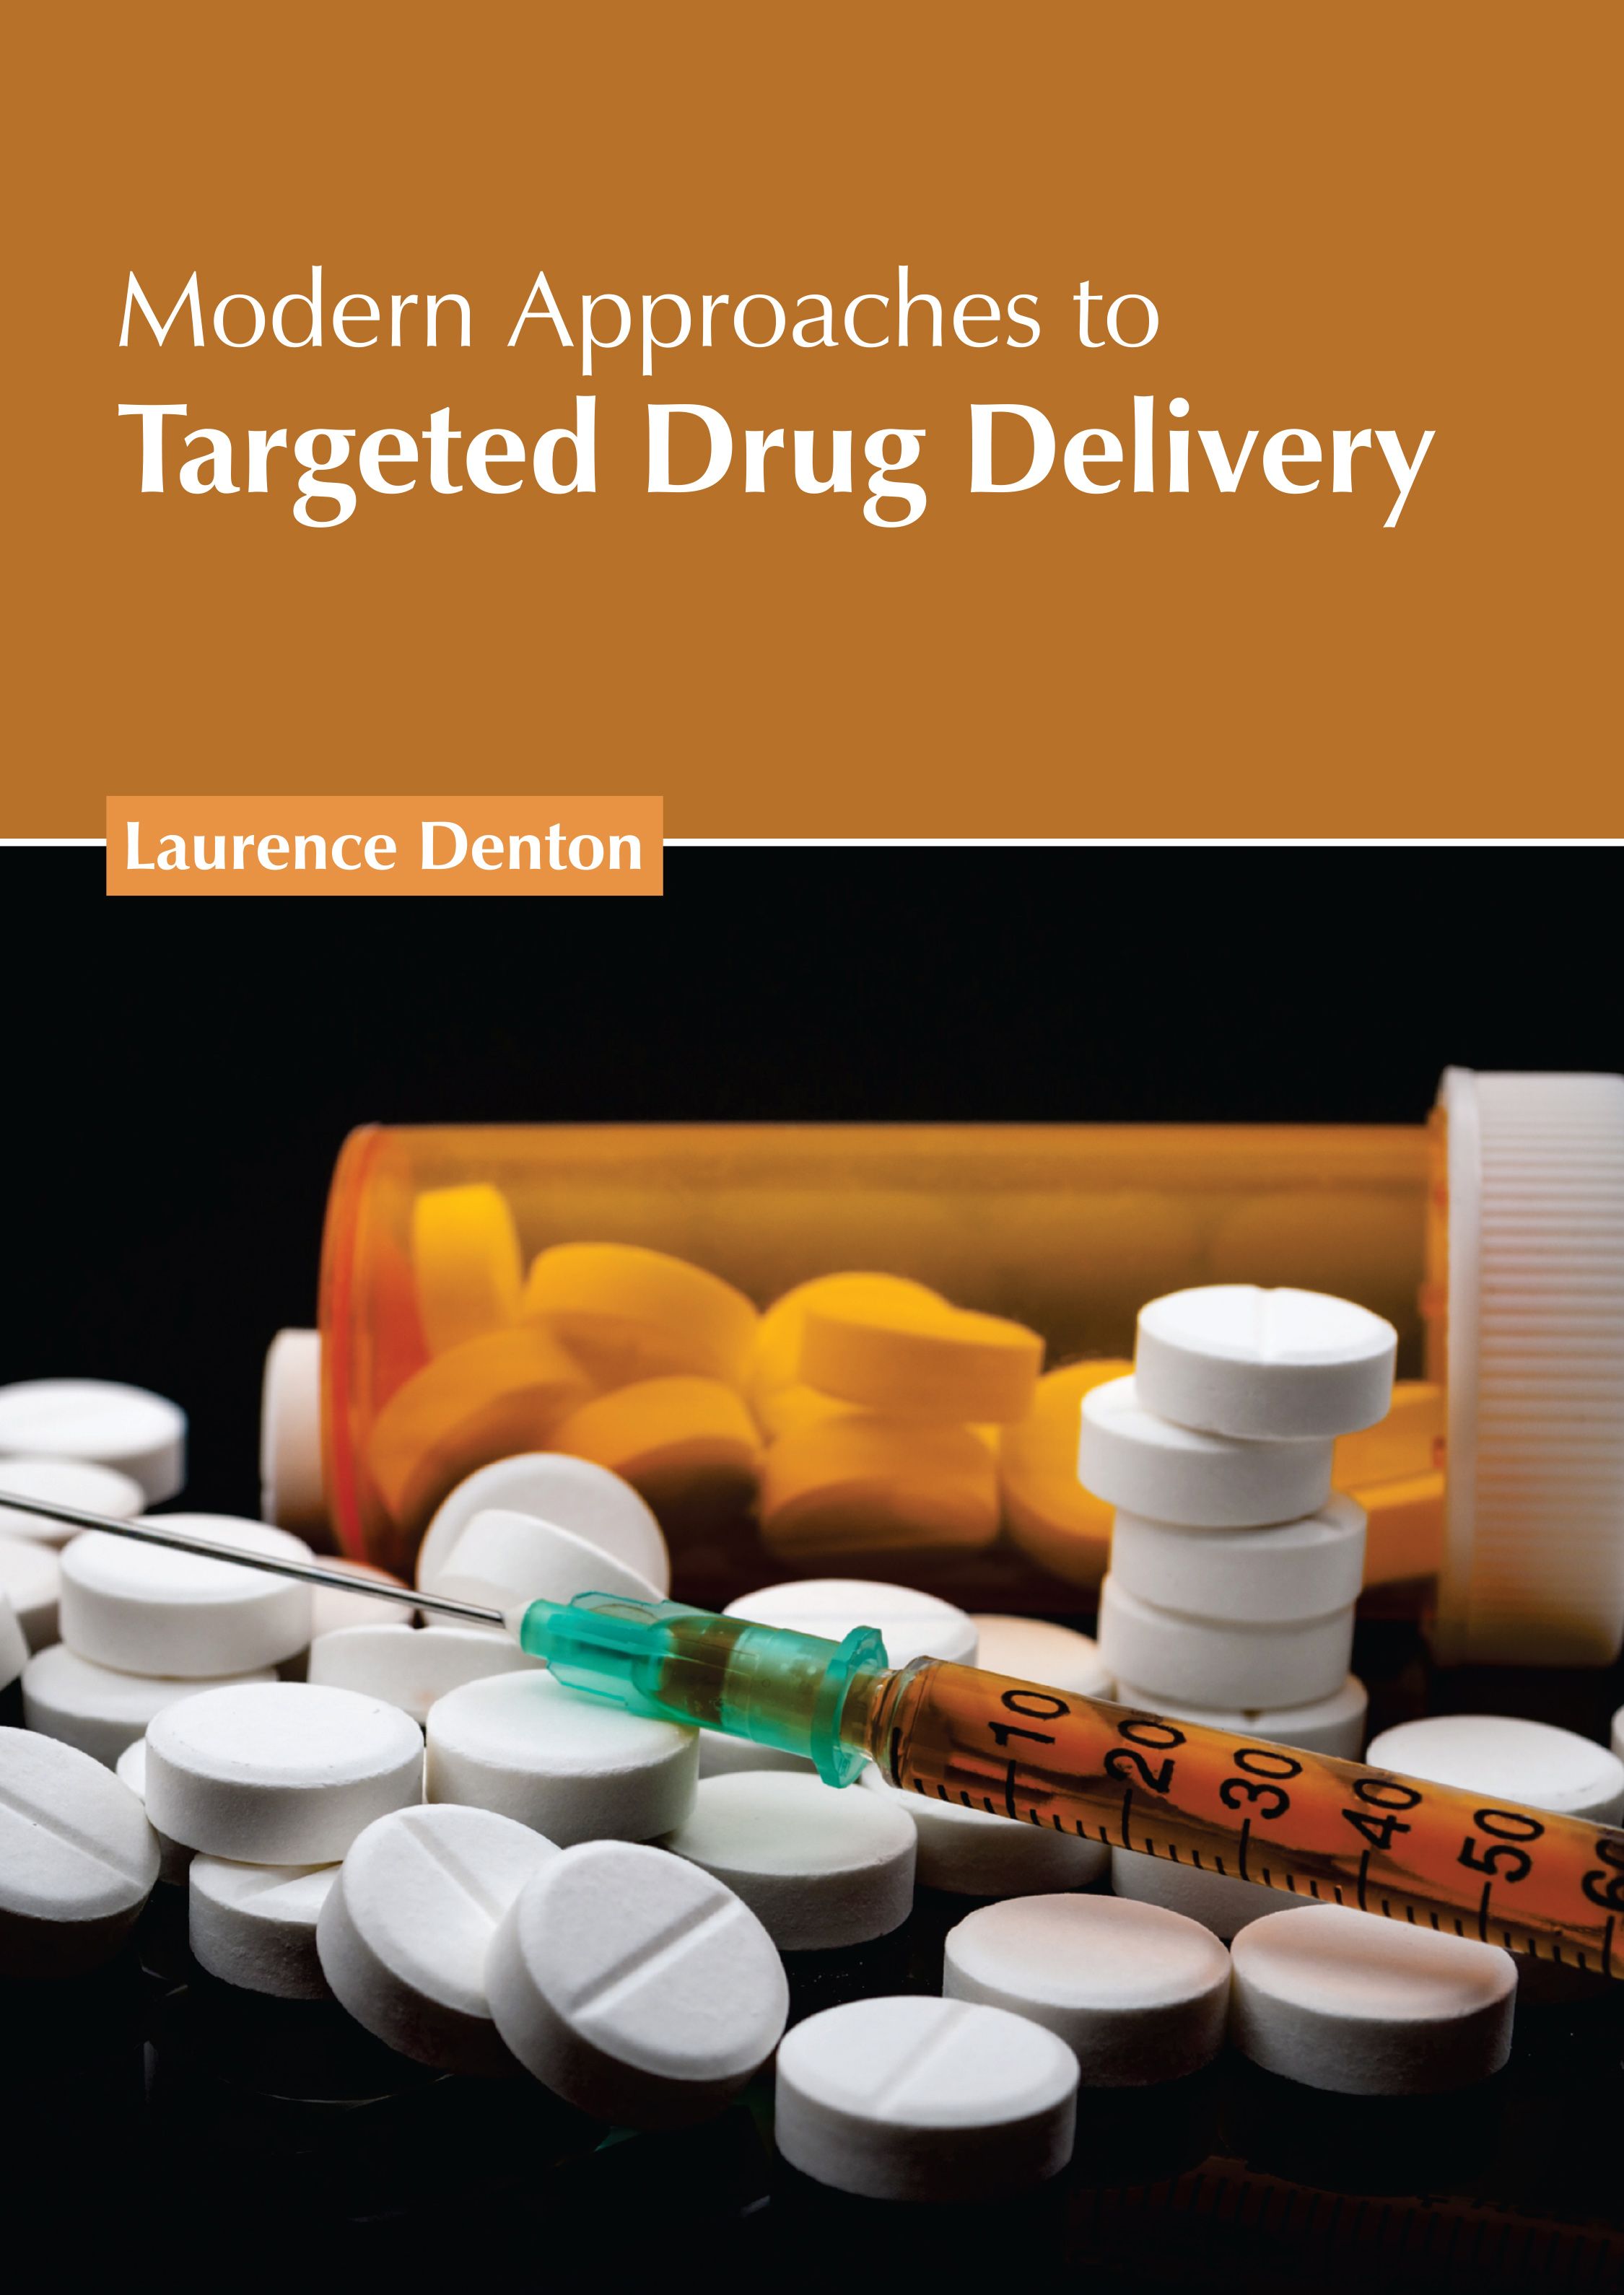 MODERN APPROACHES TO TARGETED DRUG DELIVERY